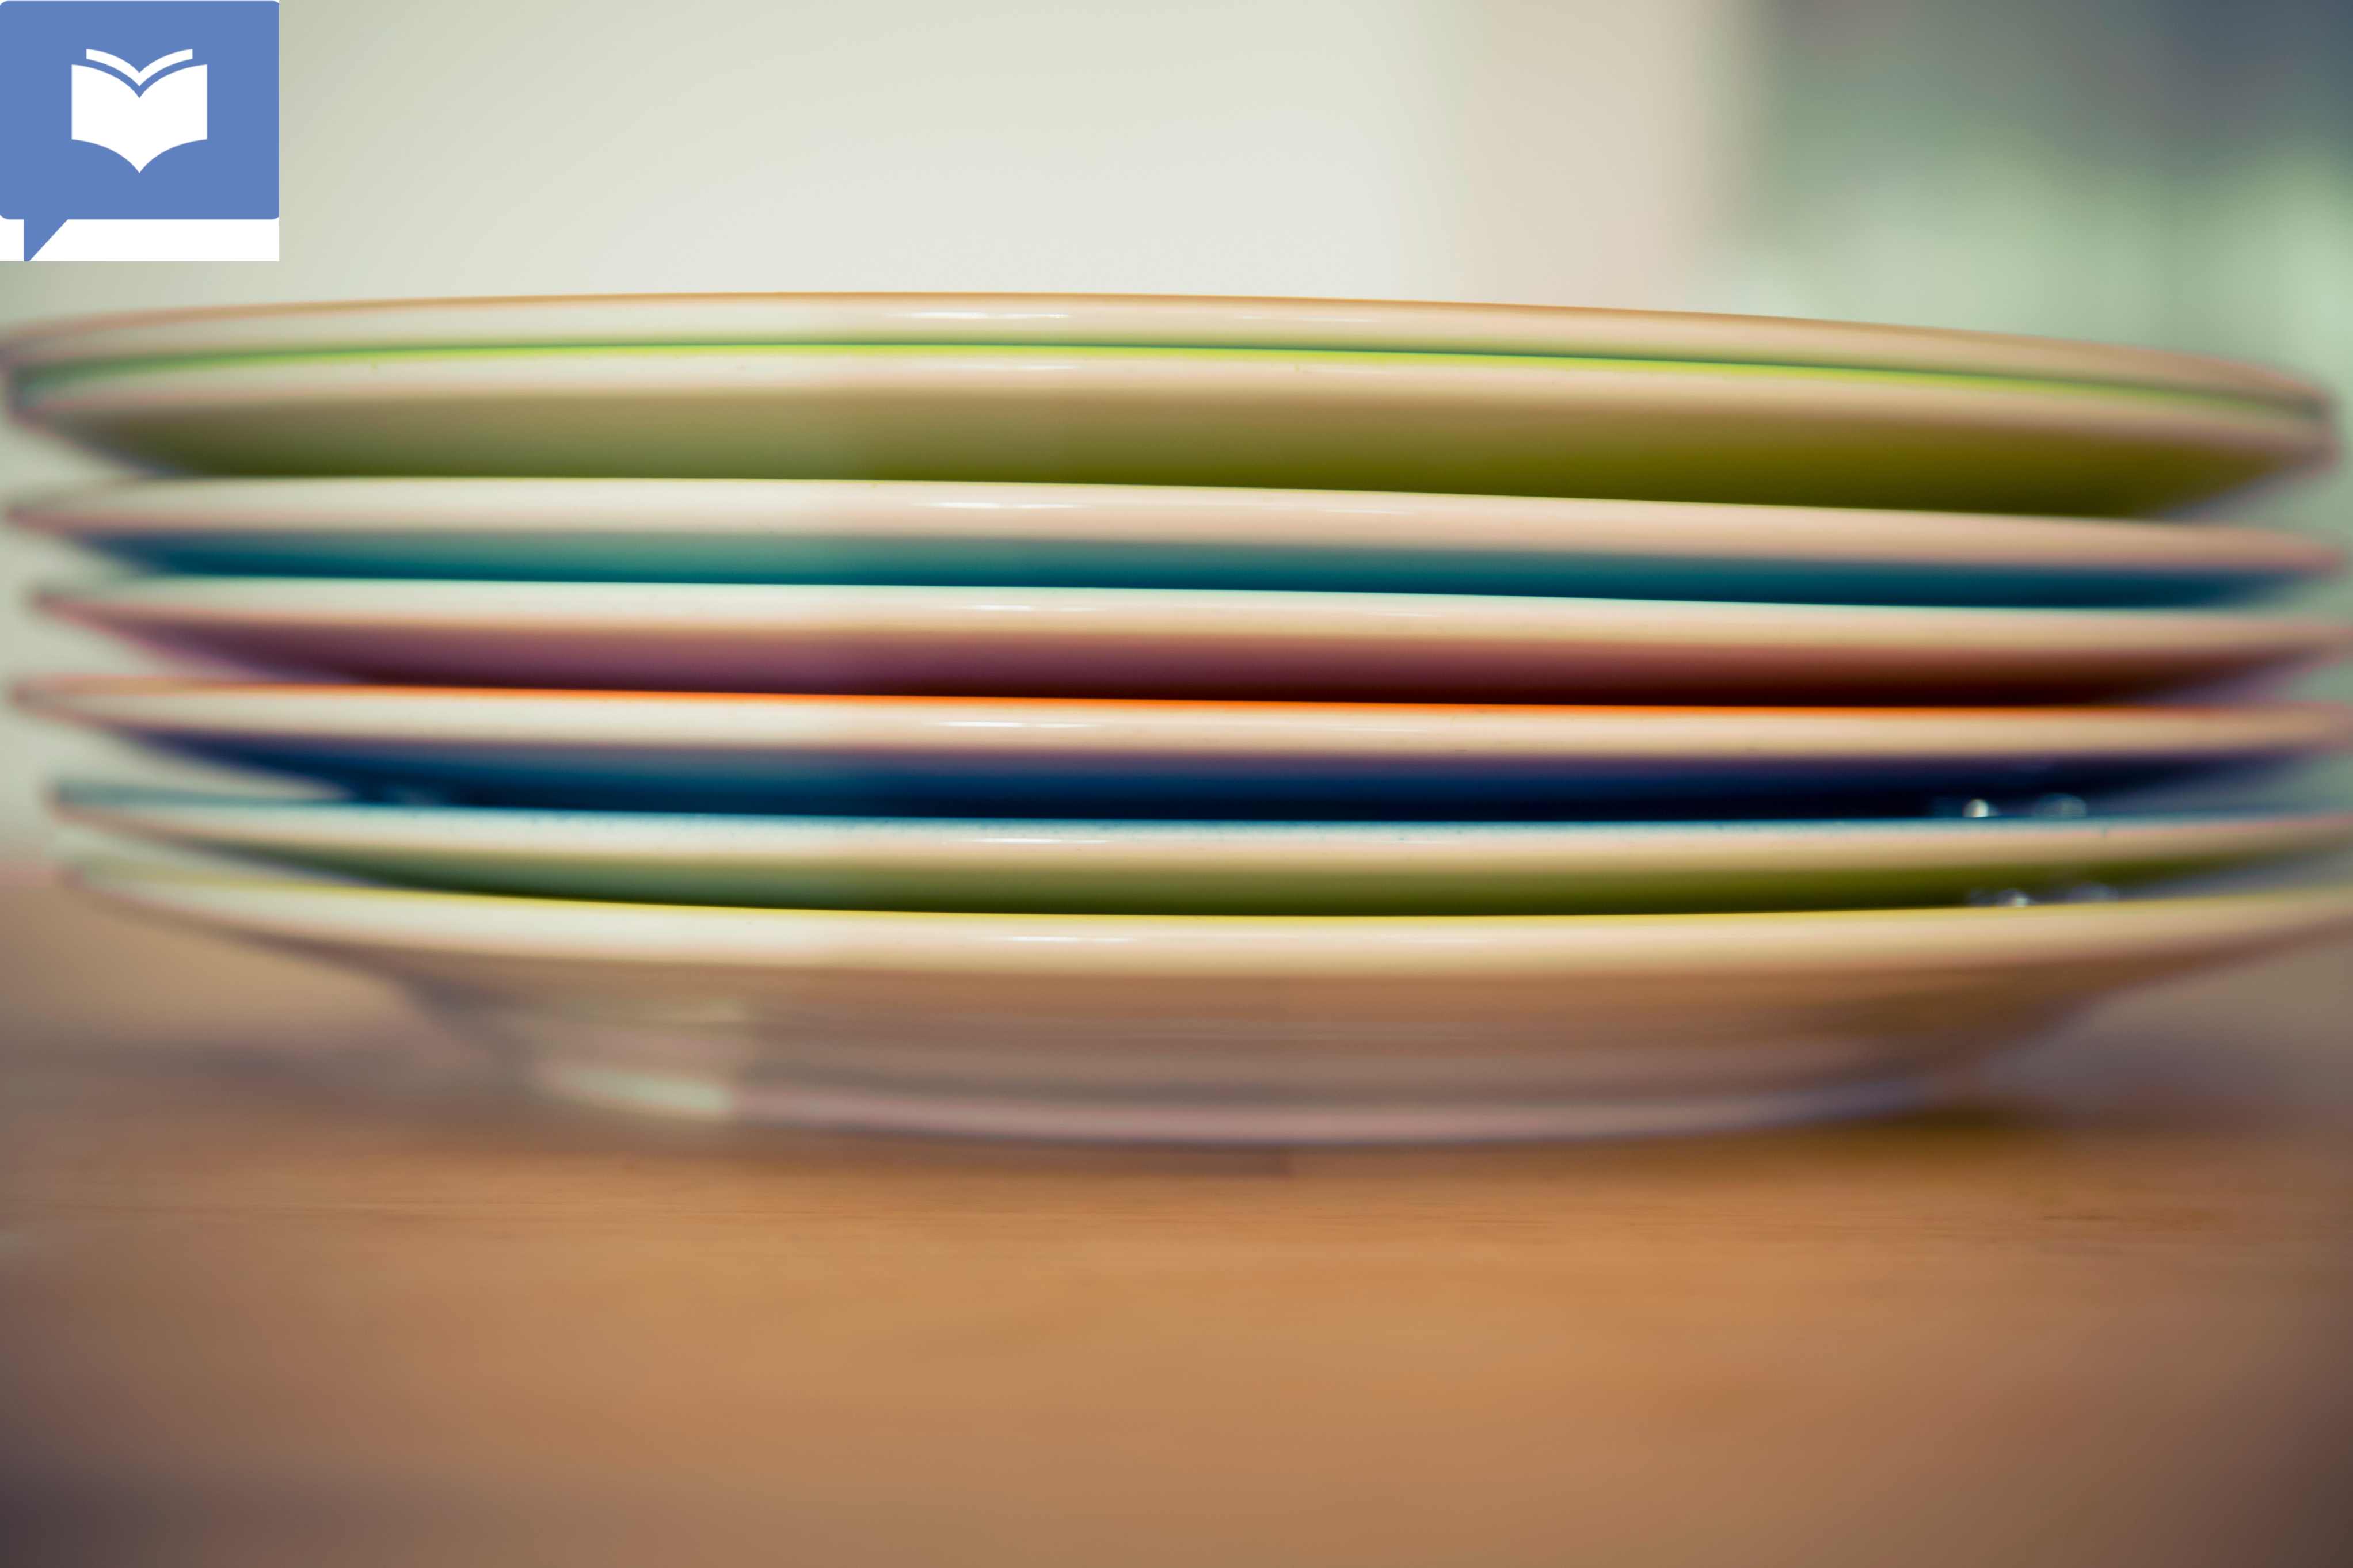 <p>The plates belong to my neighbors. These are my _______ plates.</p>